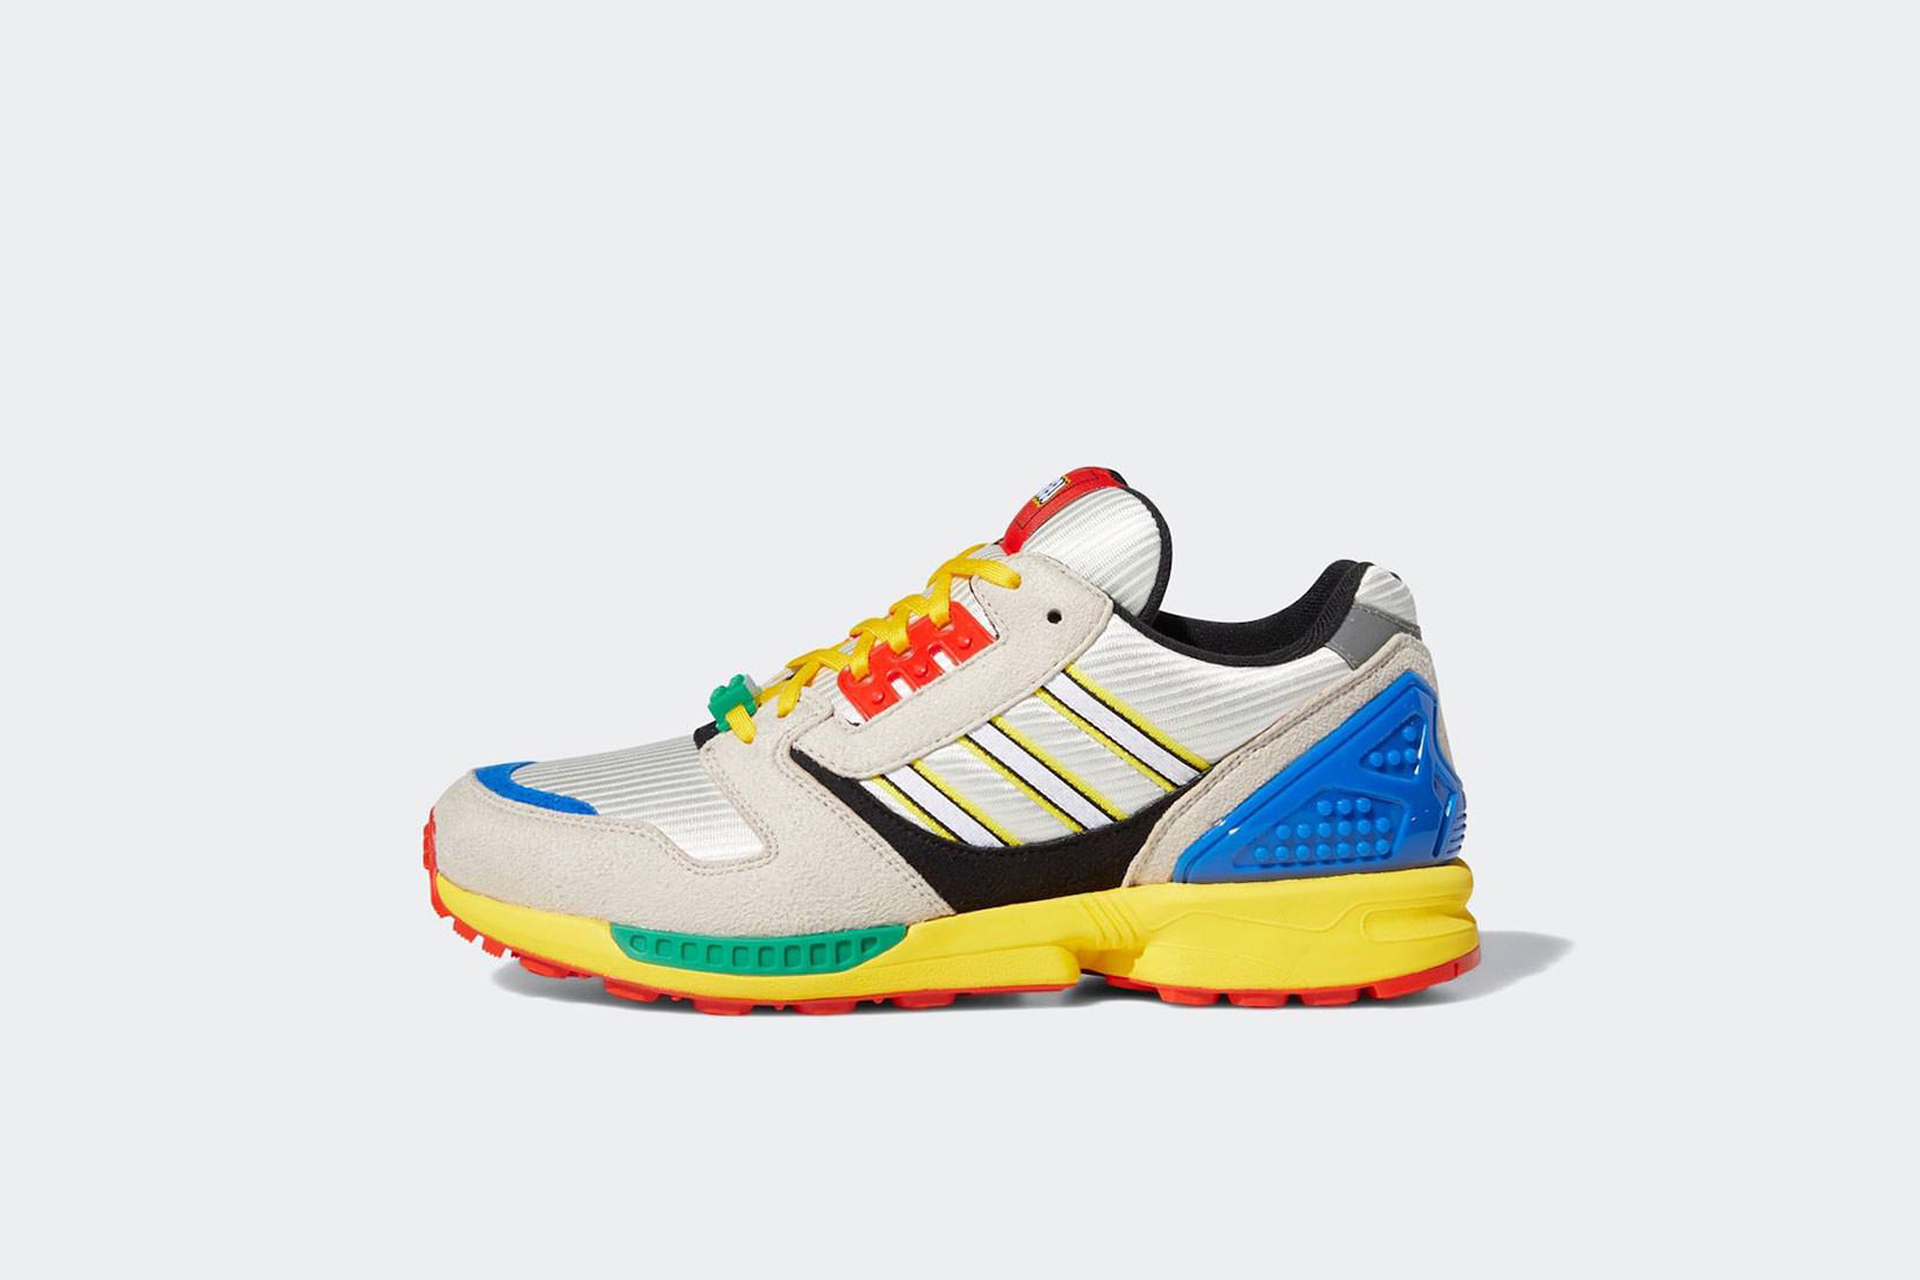 adidas ZX 8000 Lego, Yellow / Core Brown/ Ftw White - Footshop 